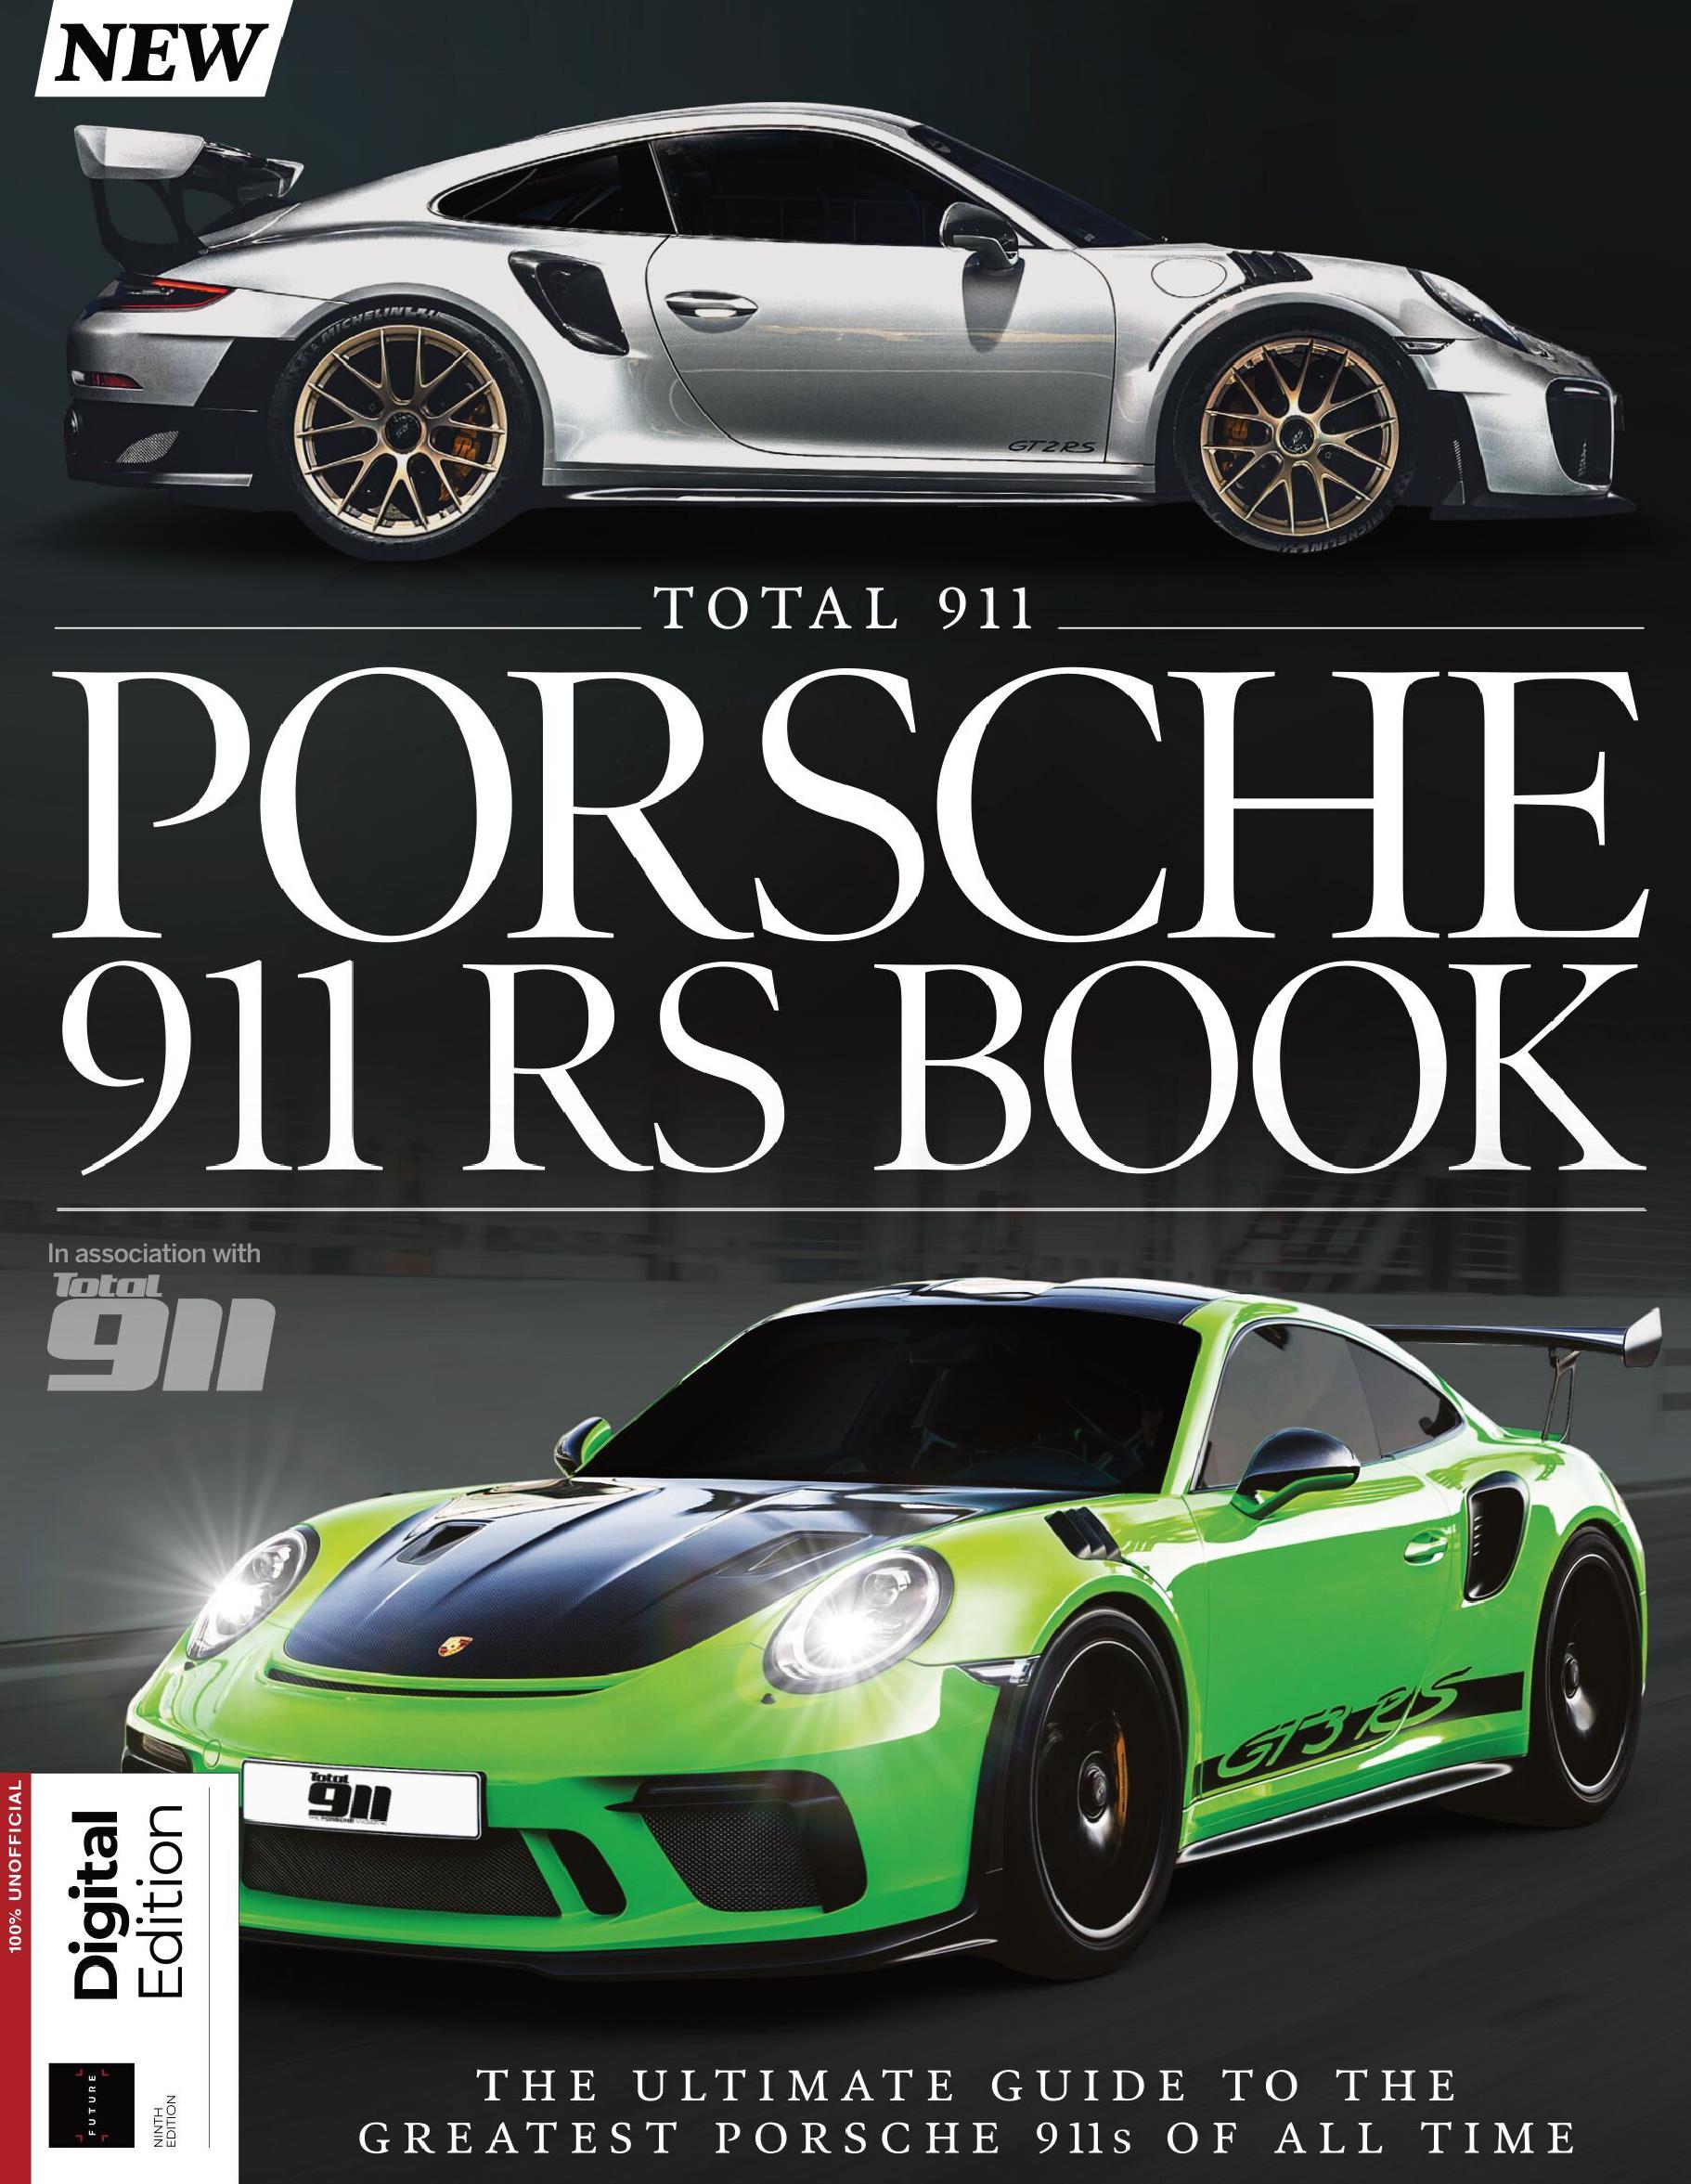 Журнал Porsche 911 RS Book. 9th Edition(from the publishers of Total 911)